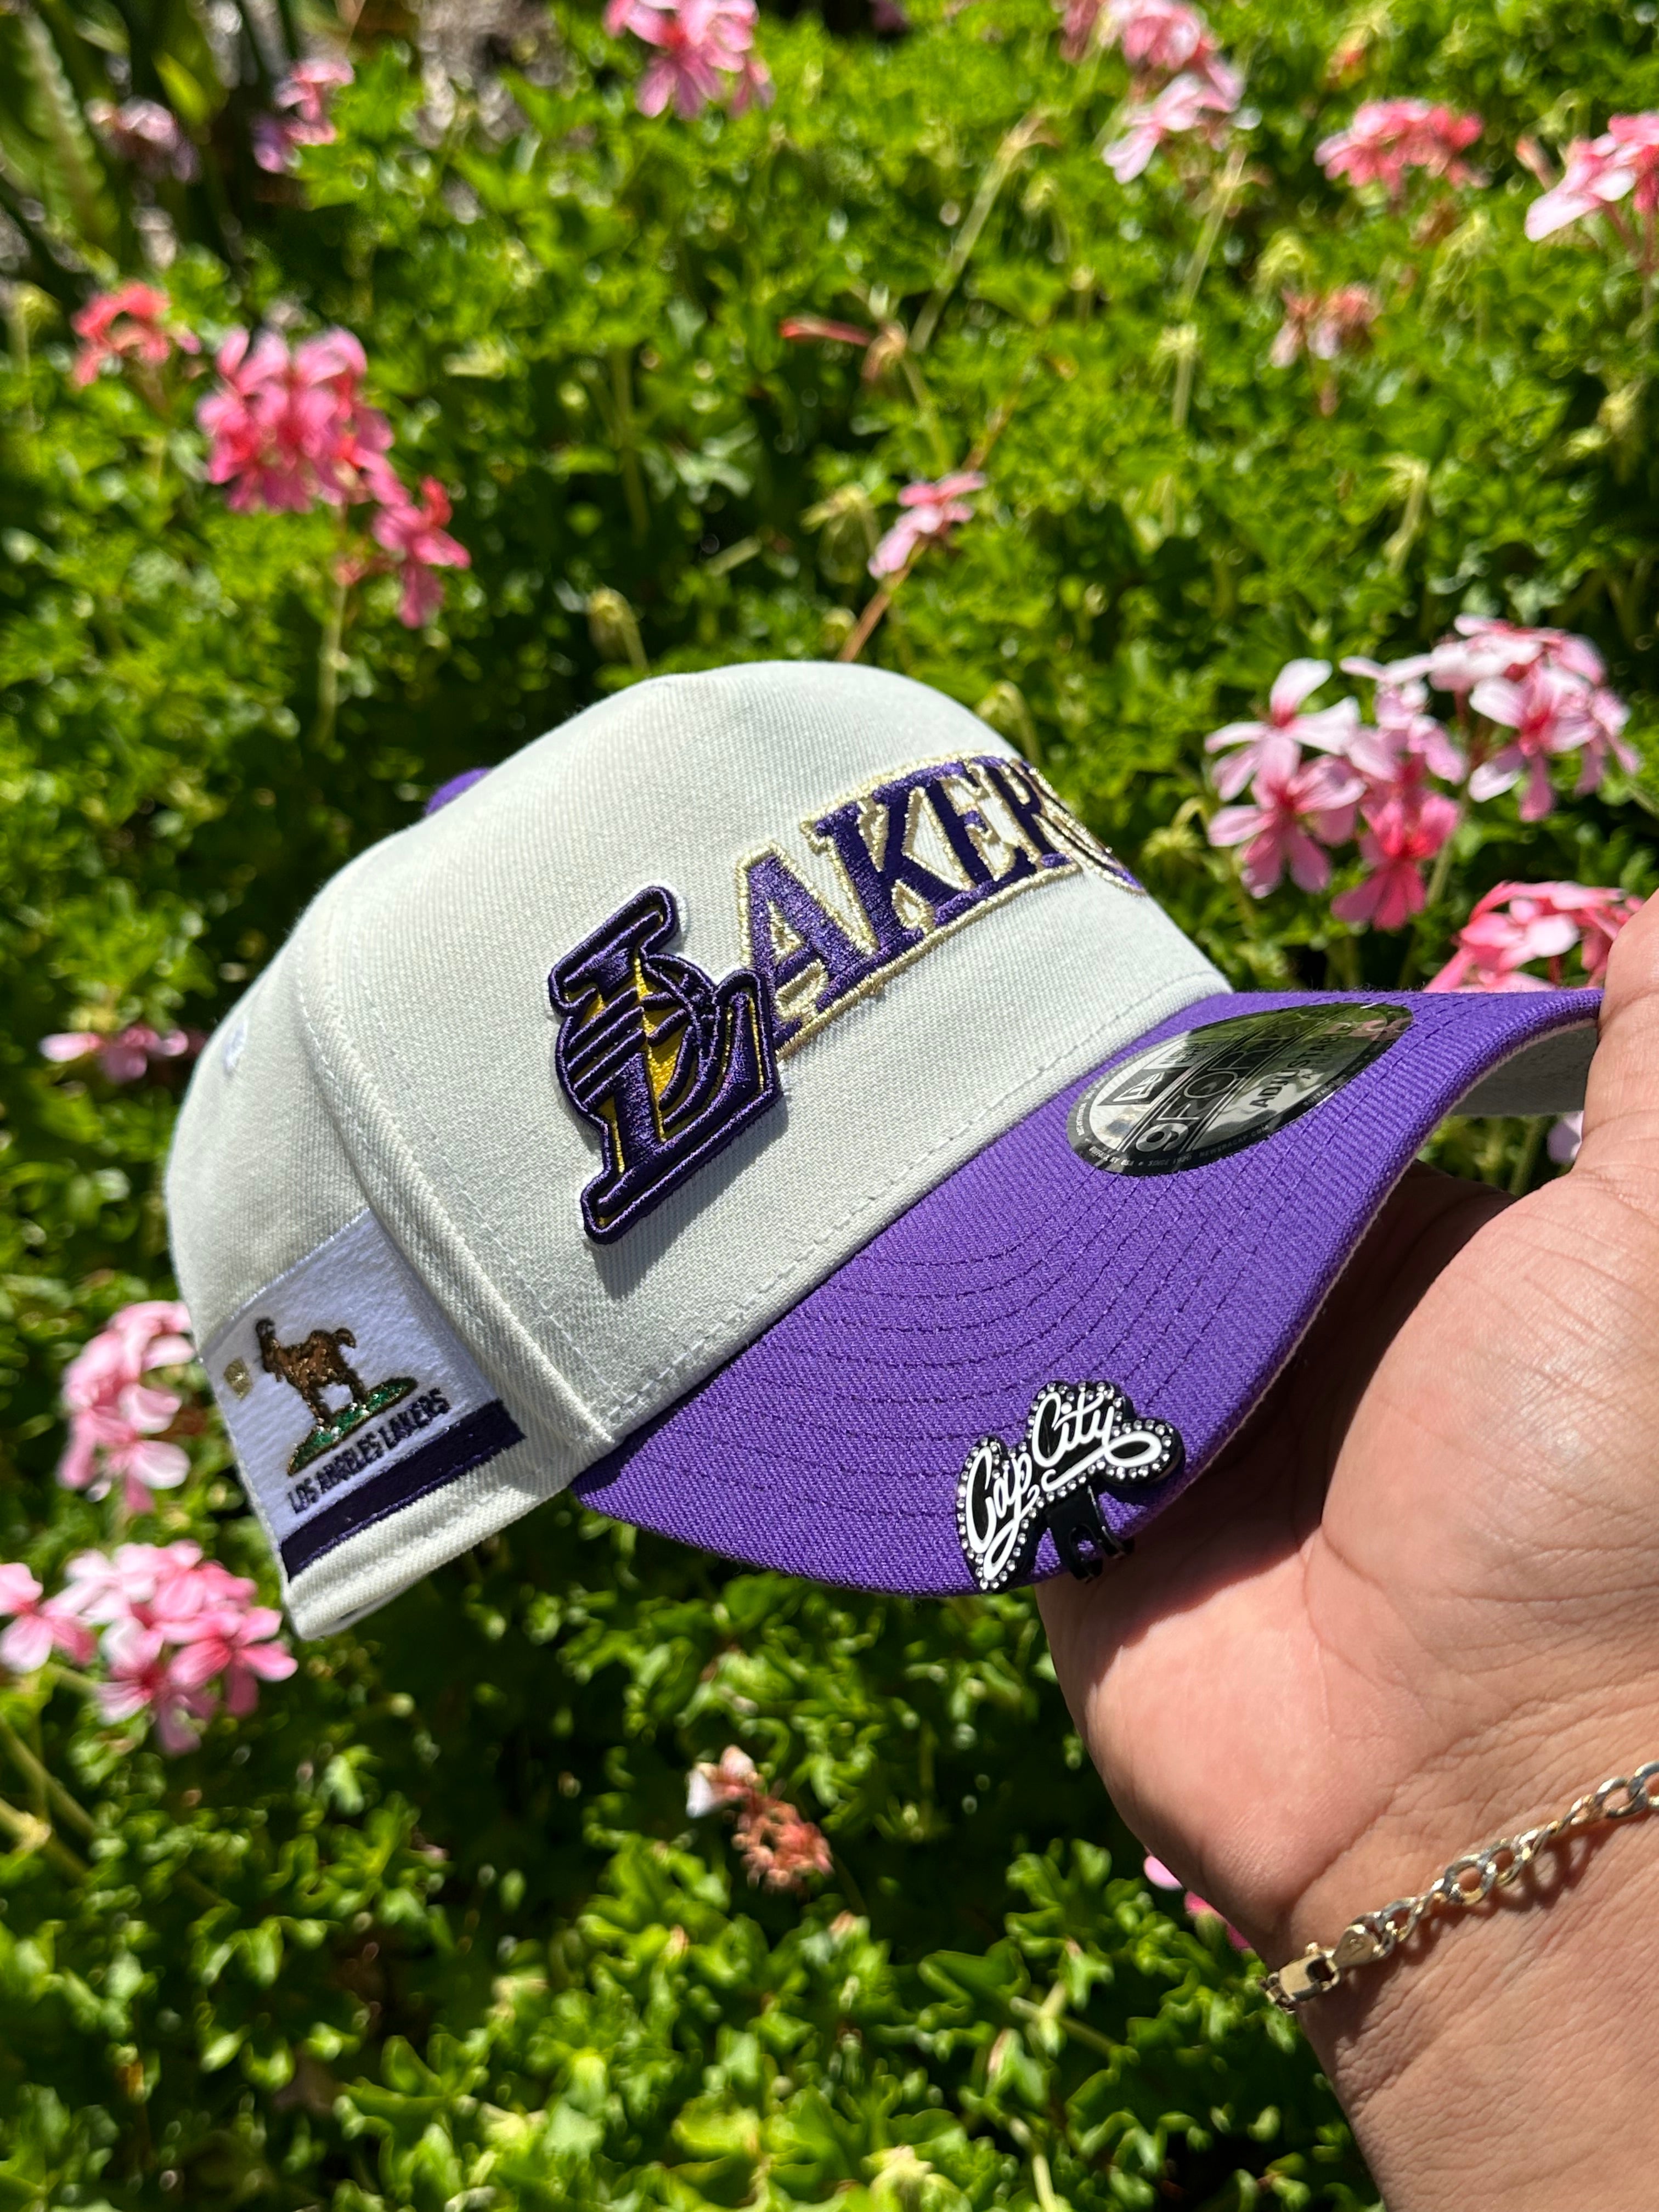 NEW ERA EXCLUSIVE 9FORTY A-FRAME CHROME WHITE/PURPLE LOS ANGELES LAKERS W/ GOAT SIDE PATCH